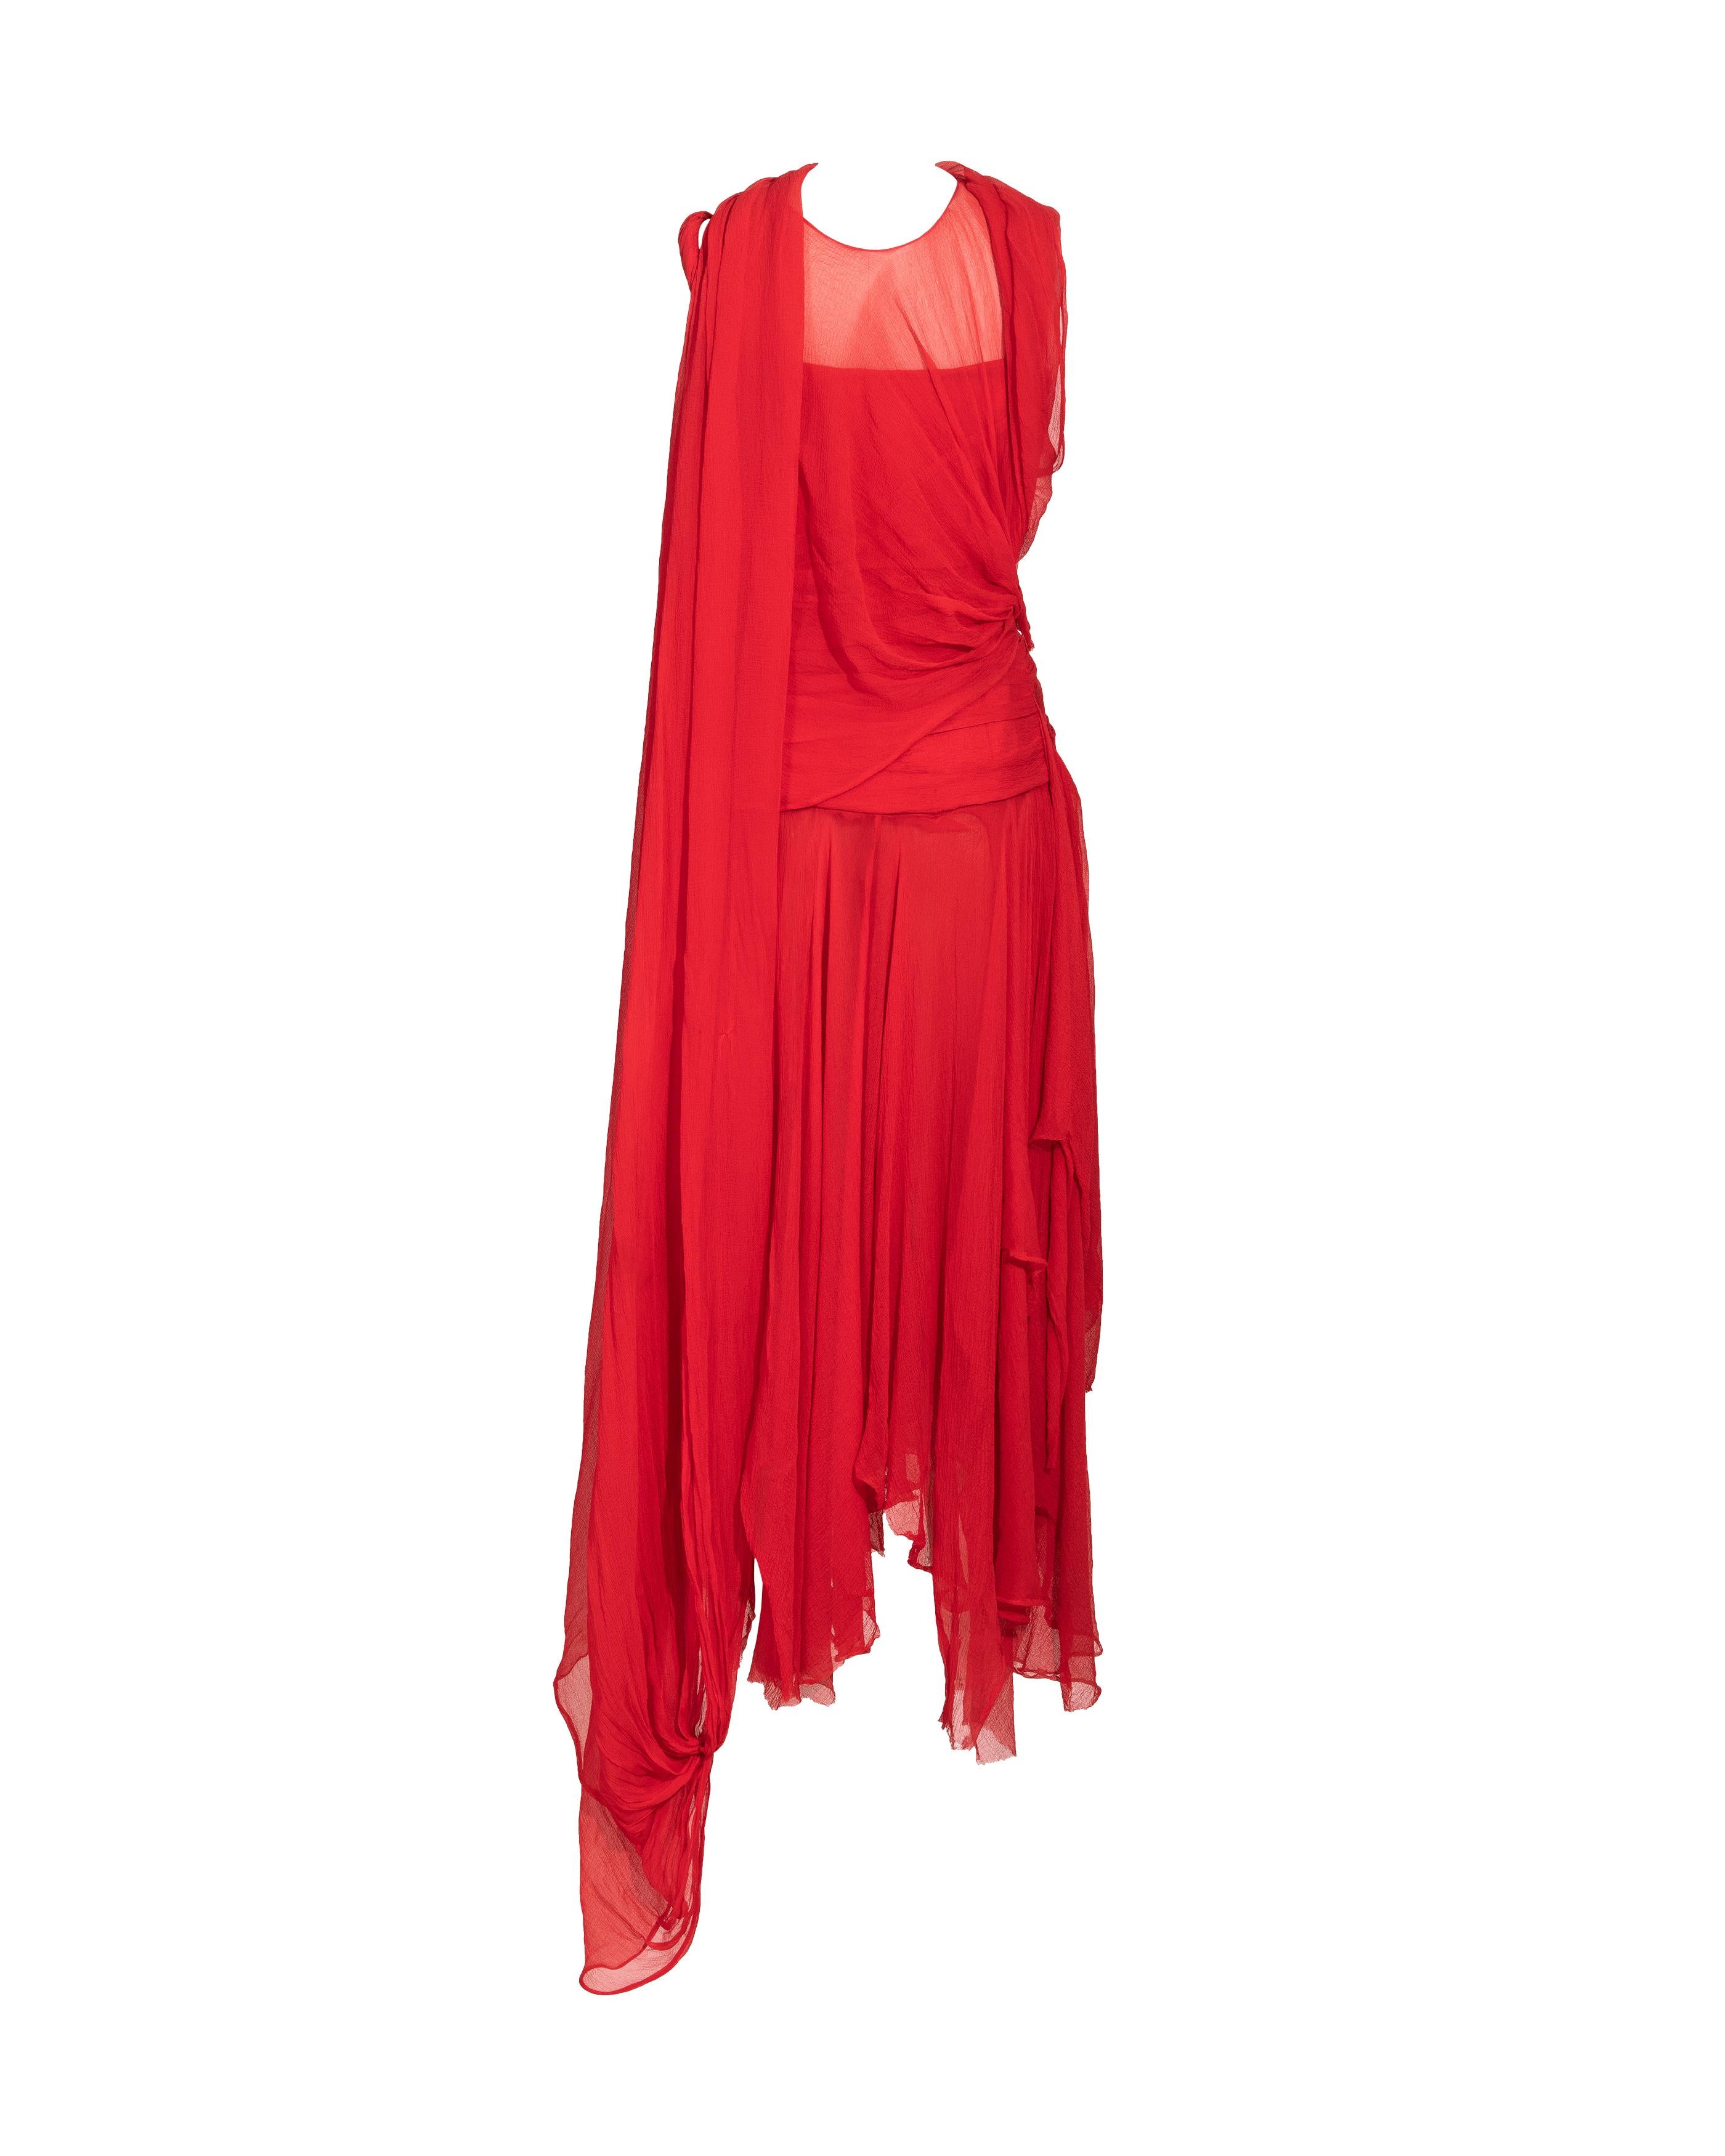 S/S 2003 Alexander McQueen  'Irere' Collection Red Silk Chiffon Gown with Sash 2